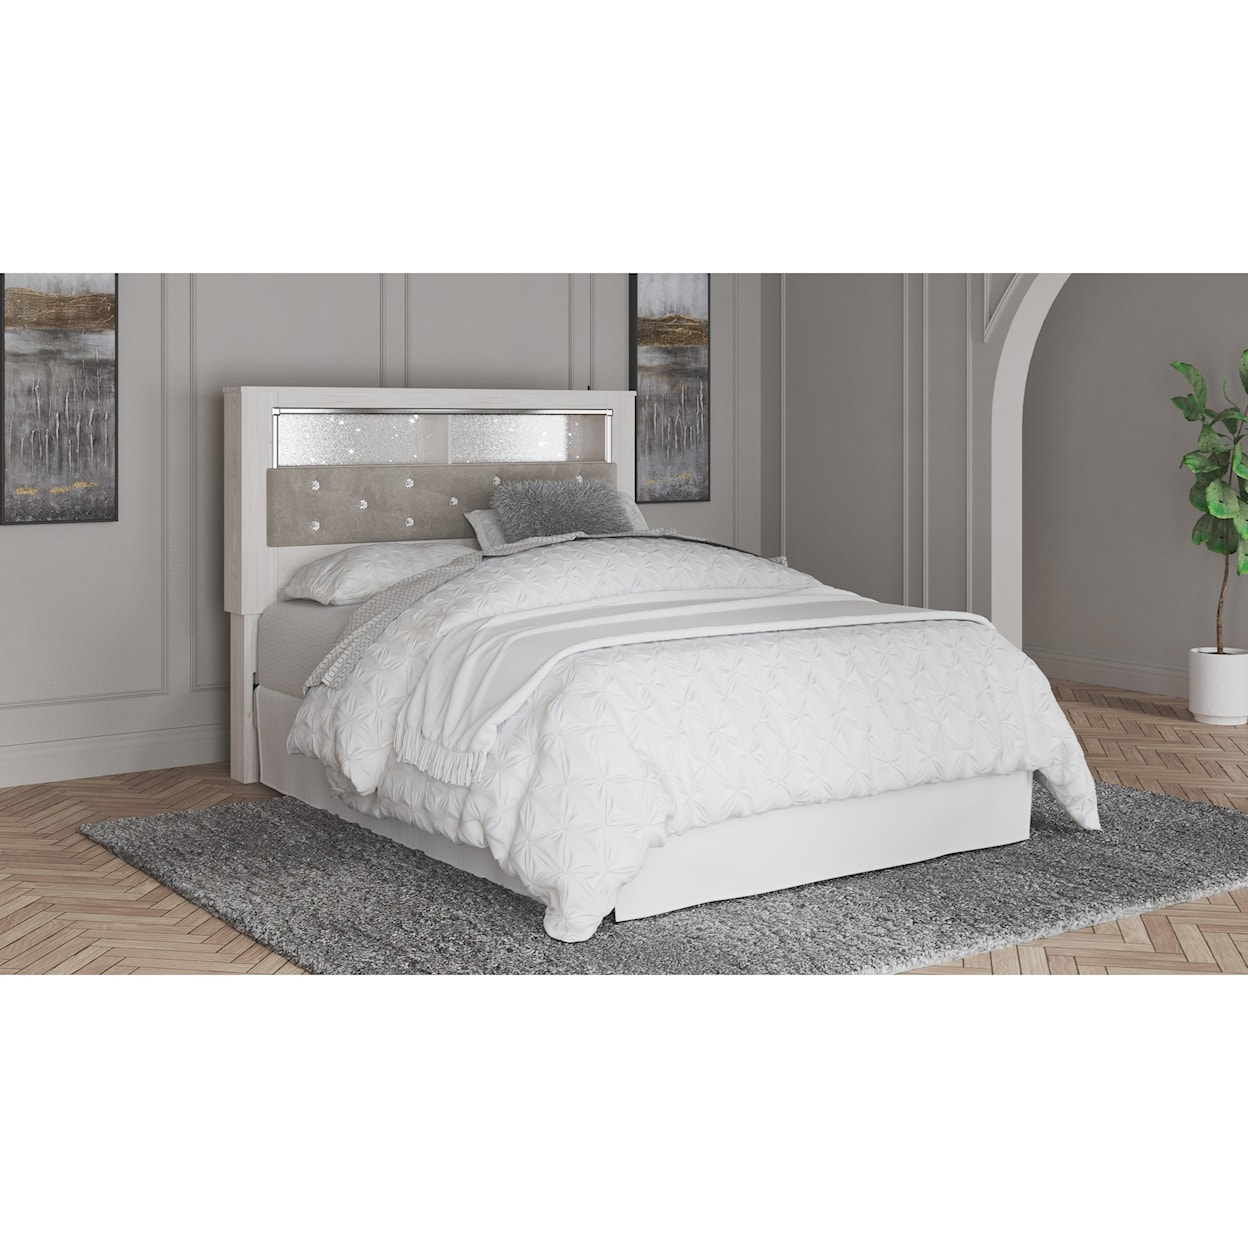 Ashley Furniture Signature Design Altyra Queen Upholstered Panel Bookcase Headboard